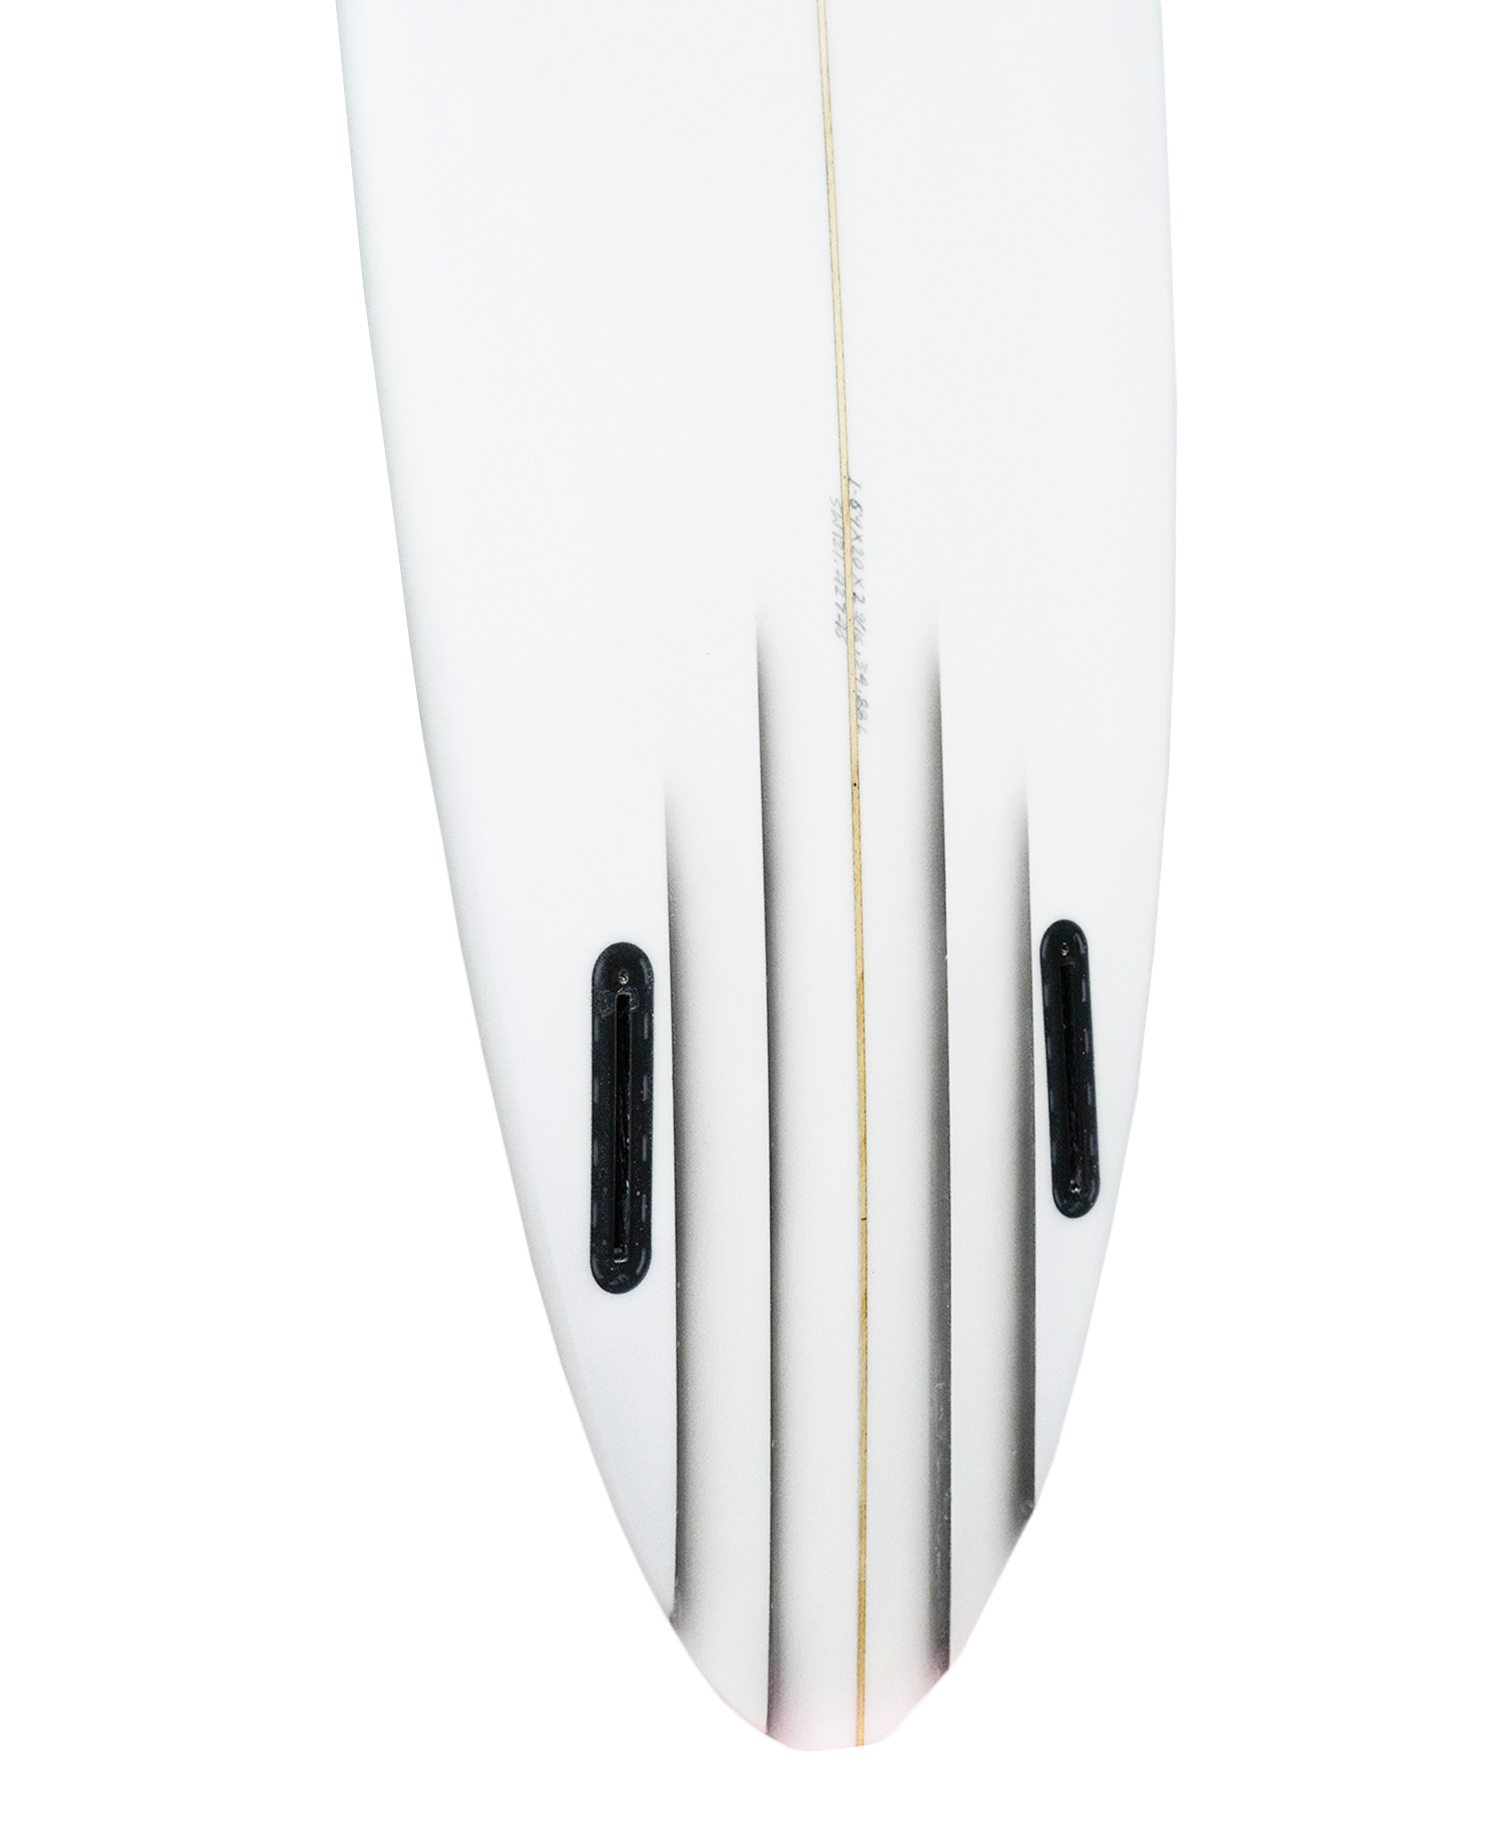 VAMPIRATE 'FAR OUT GROOVY' TWIN SURFBOARD